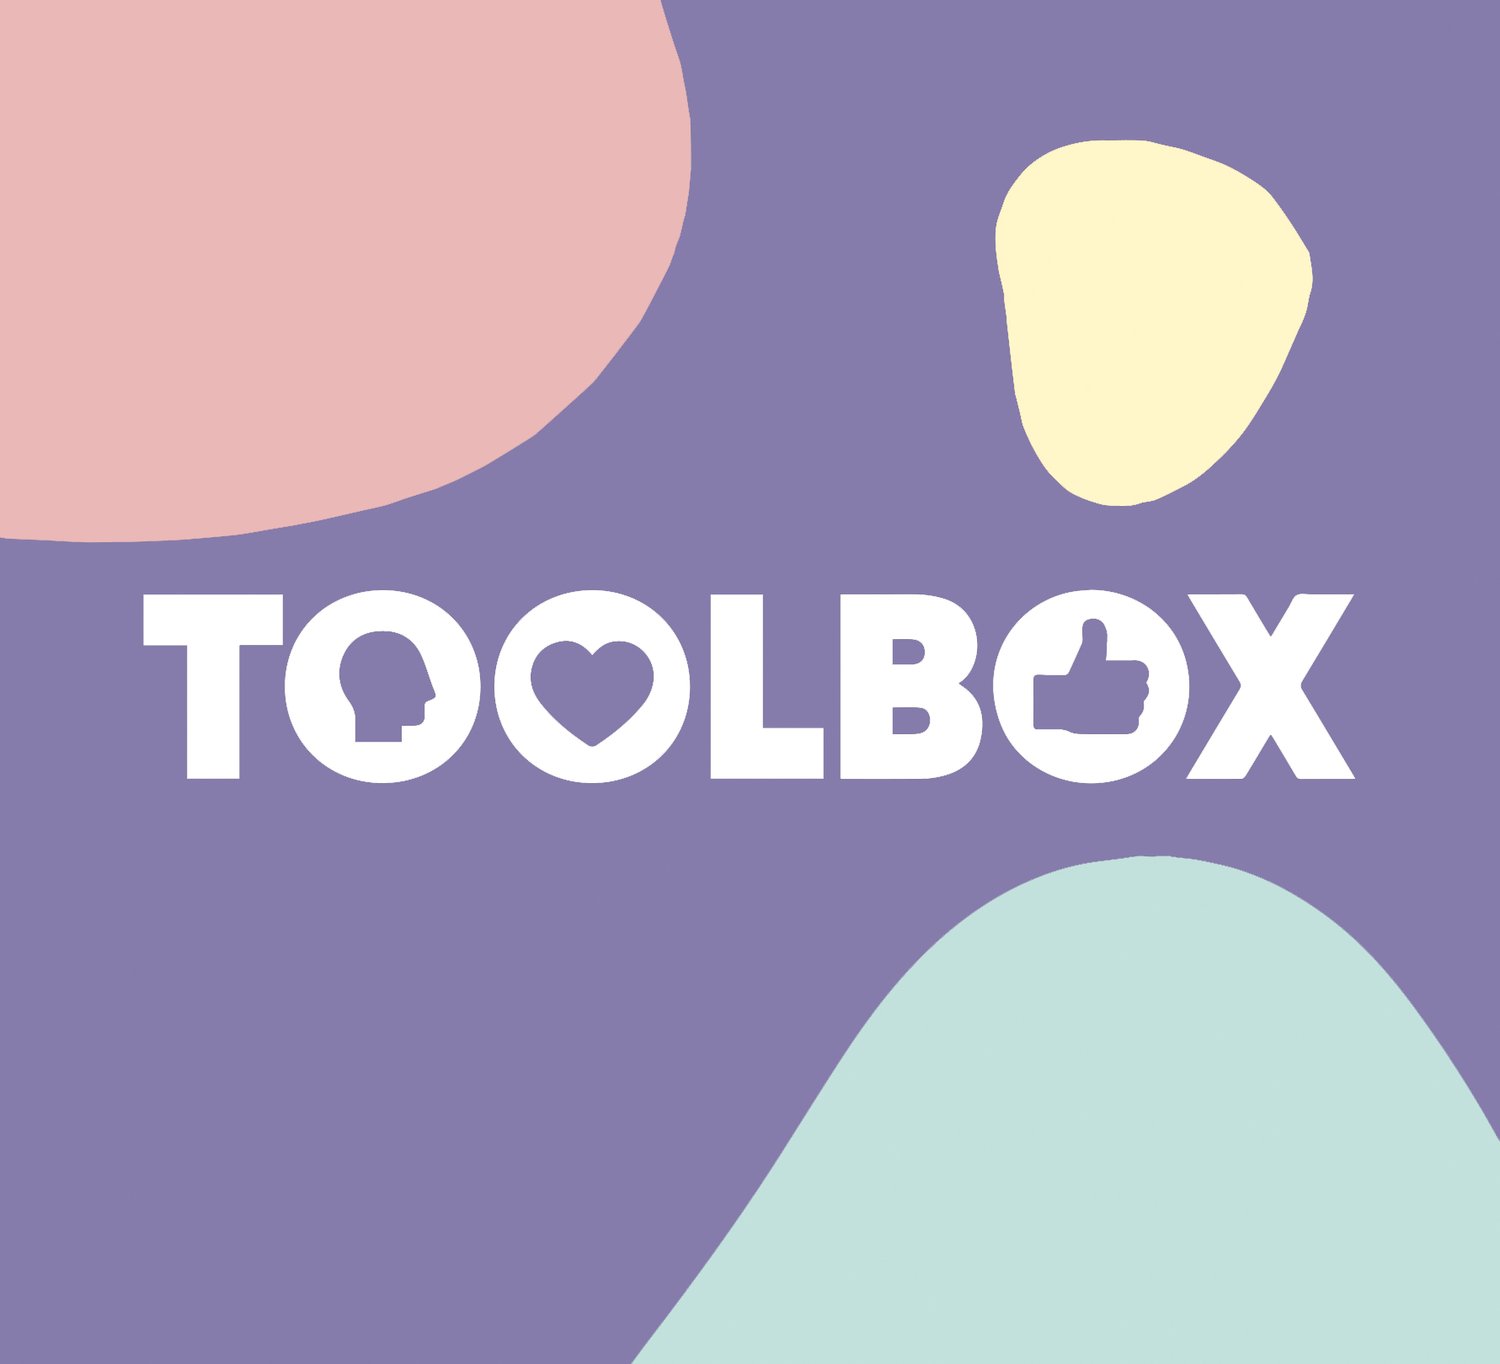 Toolbox Clinic | Psychologists in Murrumbeena, Melbourne